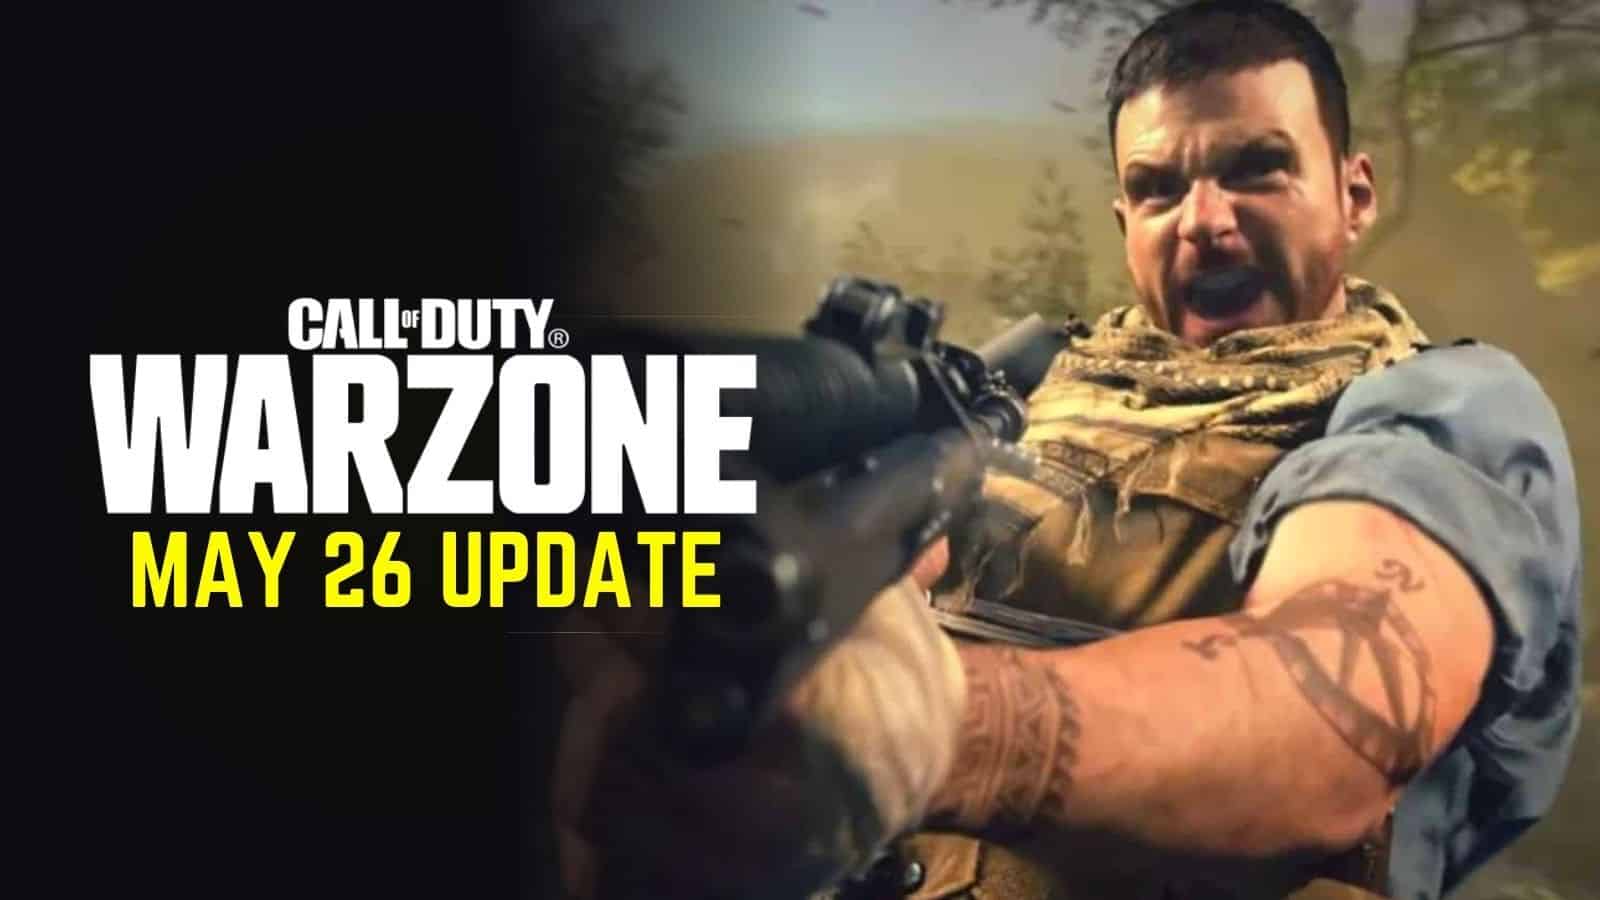 Warzone May 26 update image with character holding gun